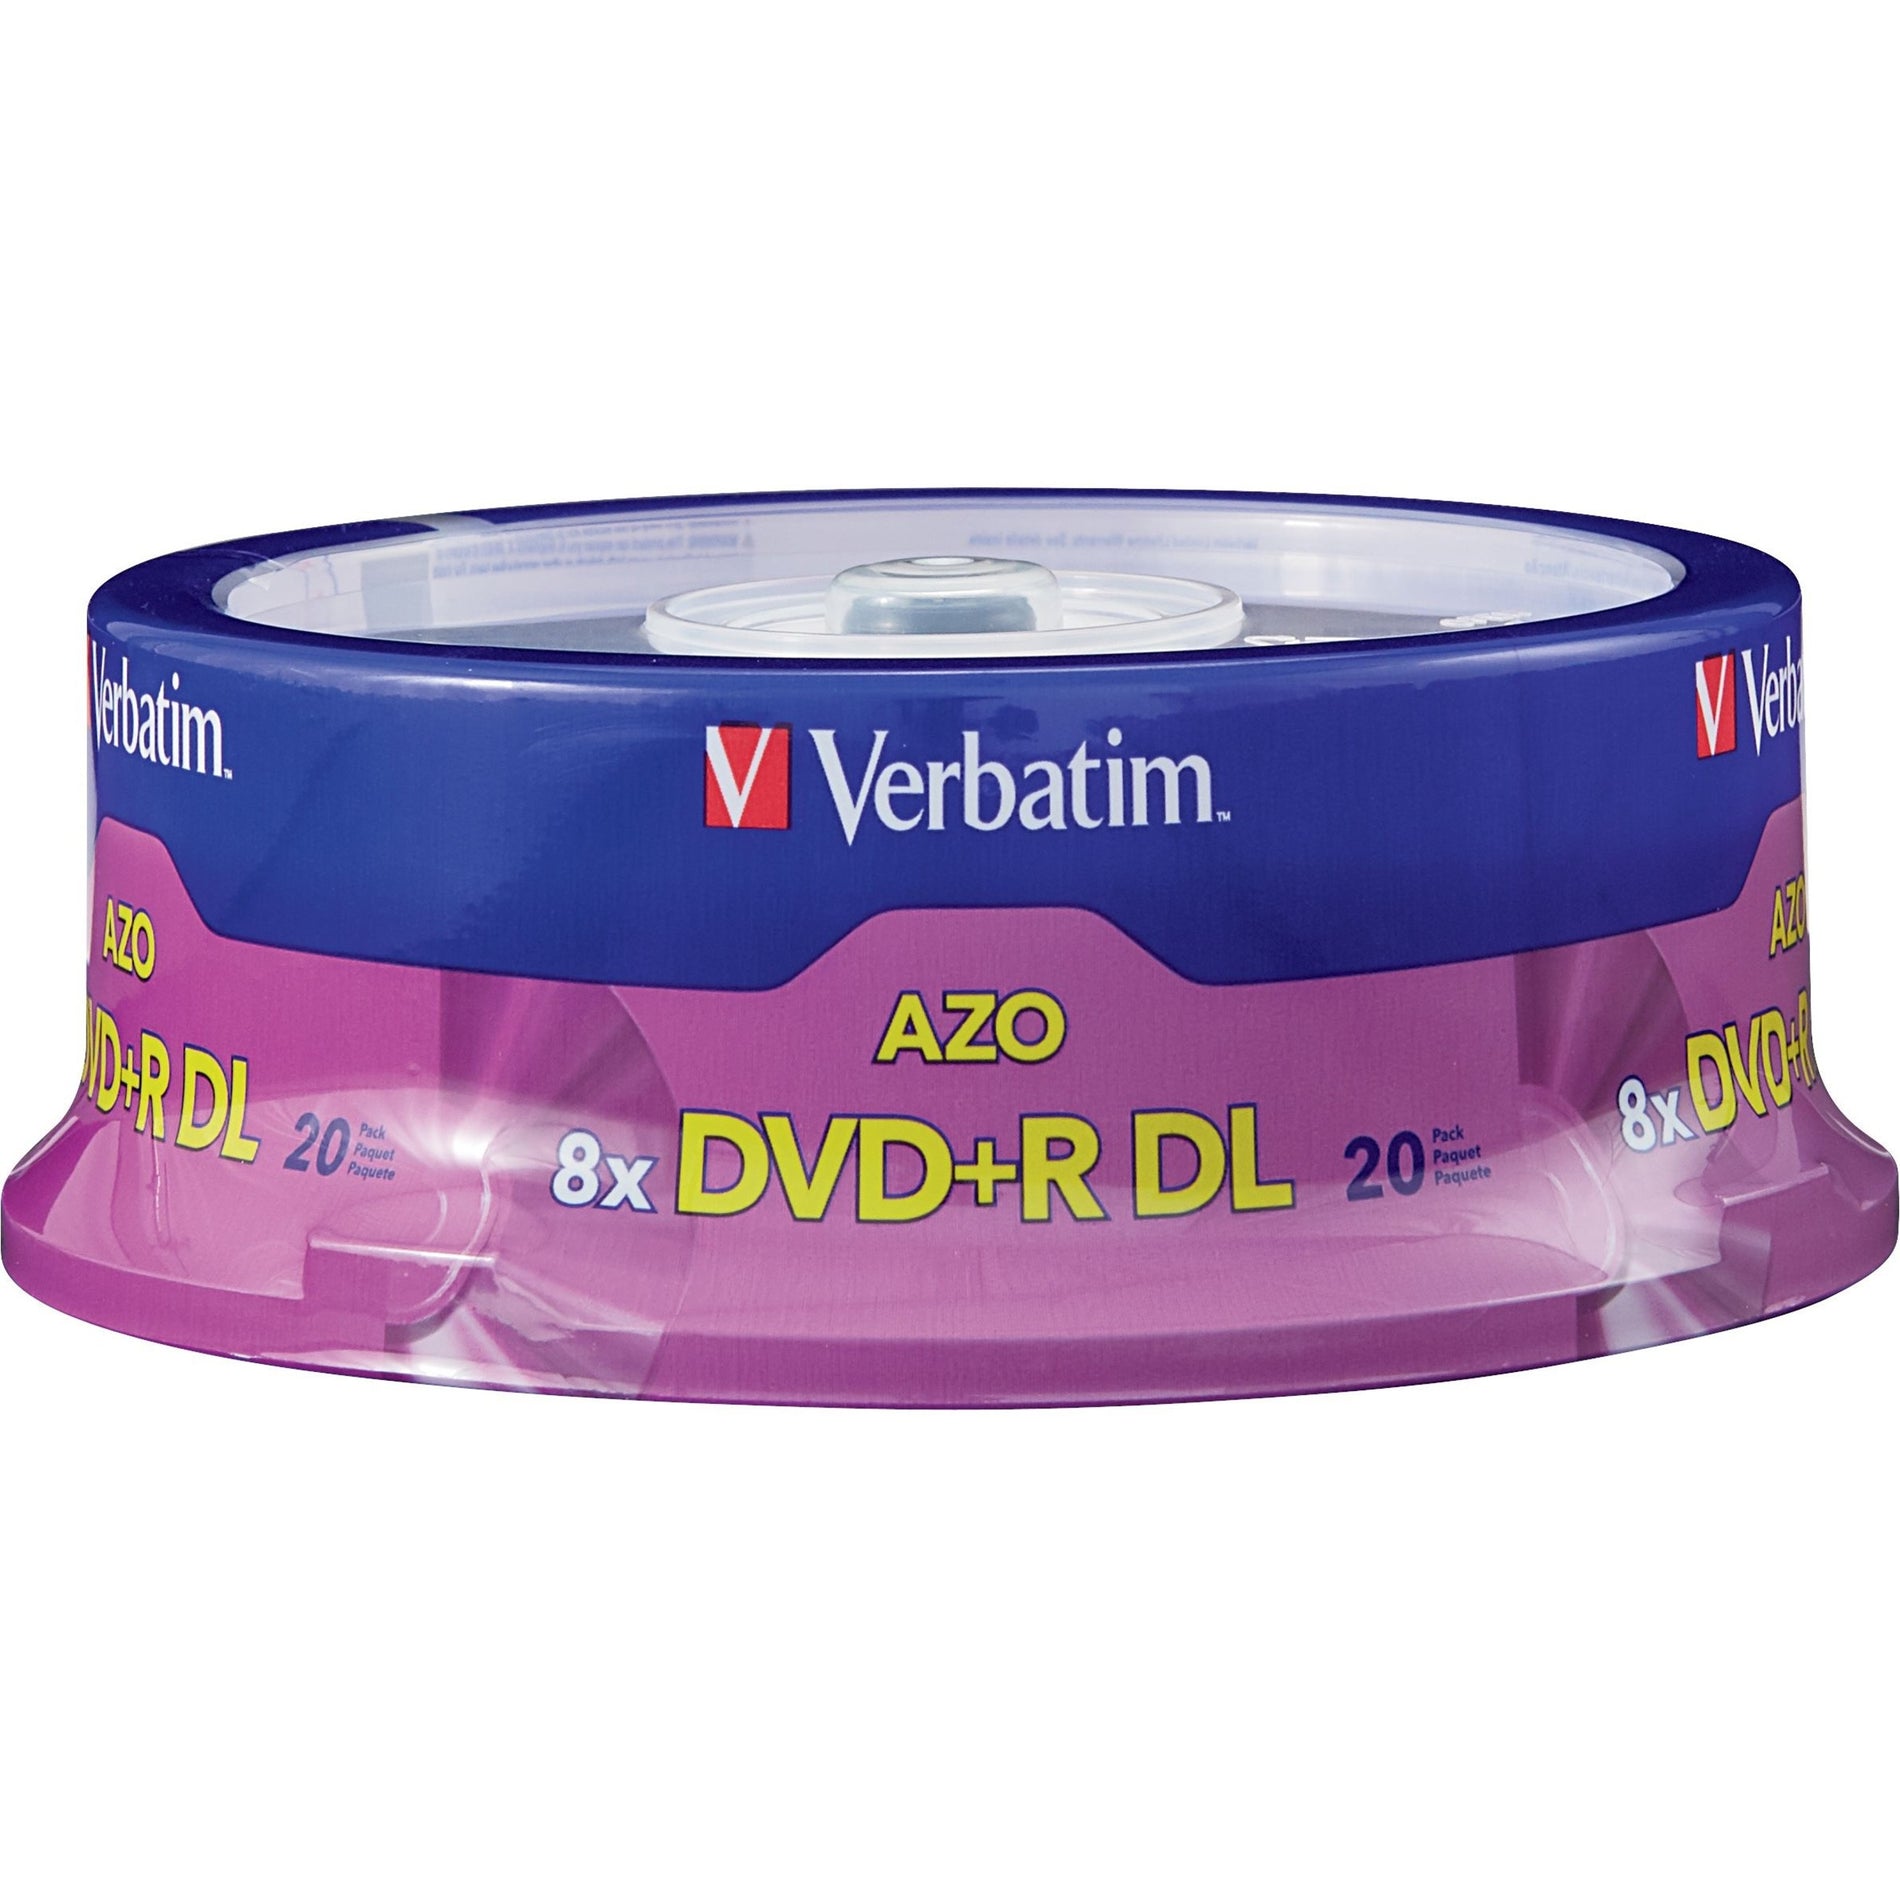 Verbatim 95310 AZO DVD+R DL 8.5GB 8X with Branded Surface - 20pk Spindle, Lifetime Warranty, Made in United Arab Emirates